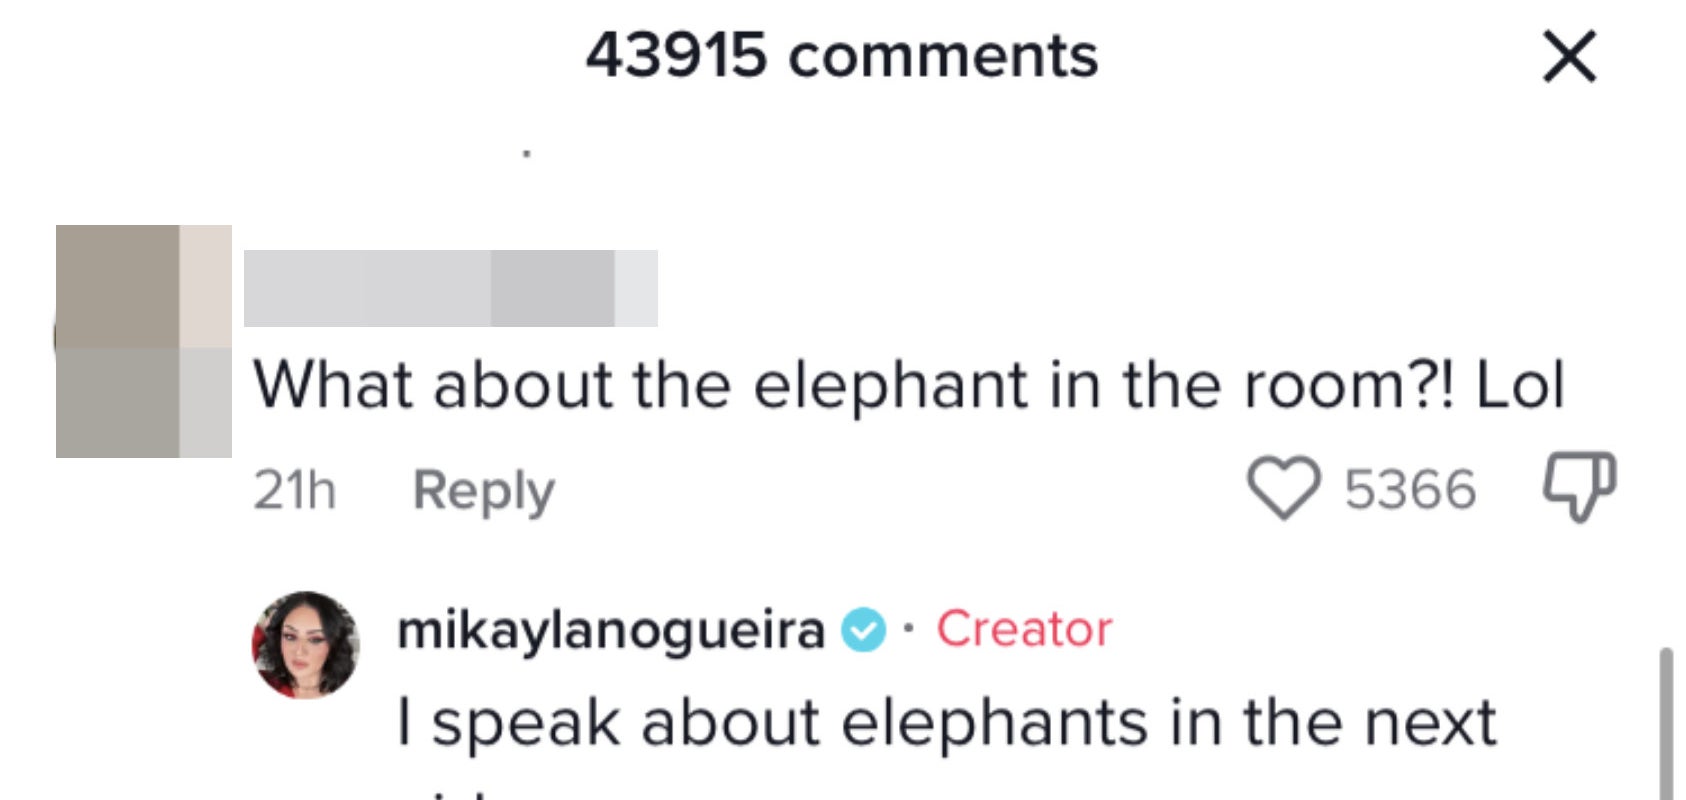 One person said &quot;What about the elephant in the room lol&quot; to which Mikayla replied &quot;I speak about elephants in the next video&quot;